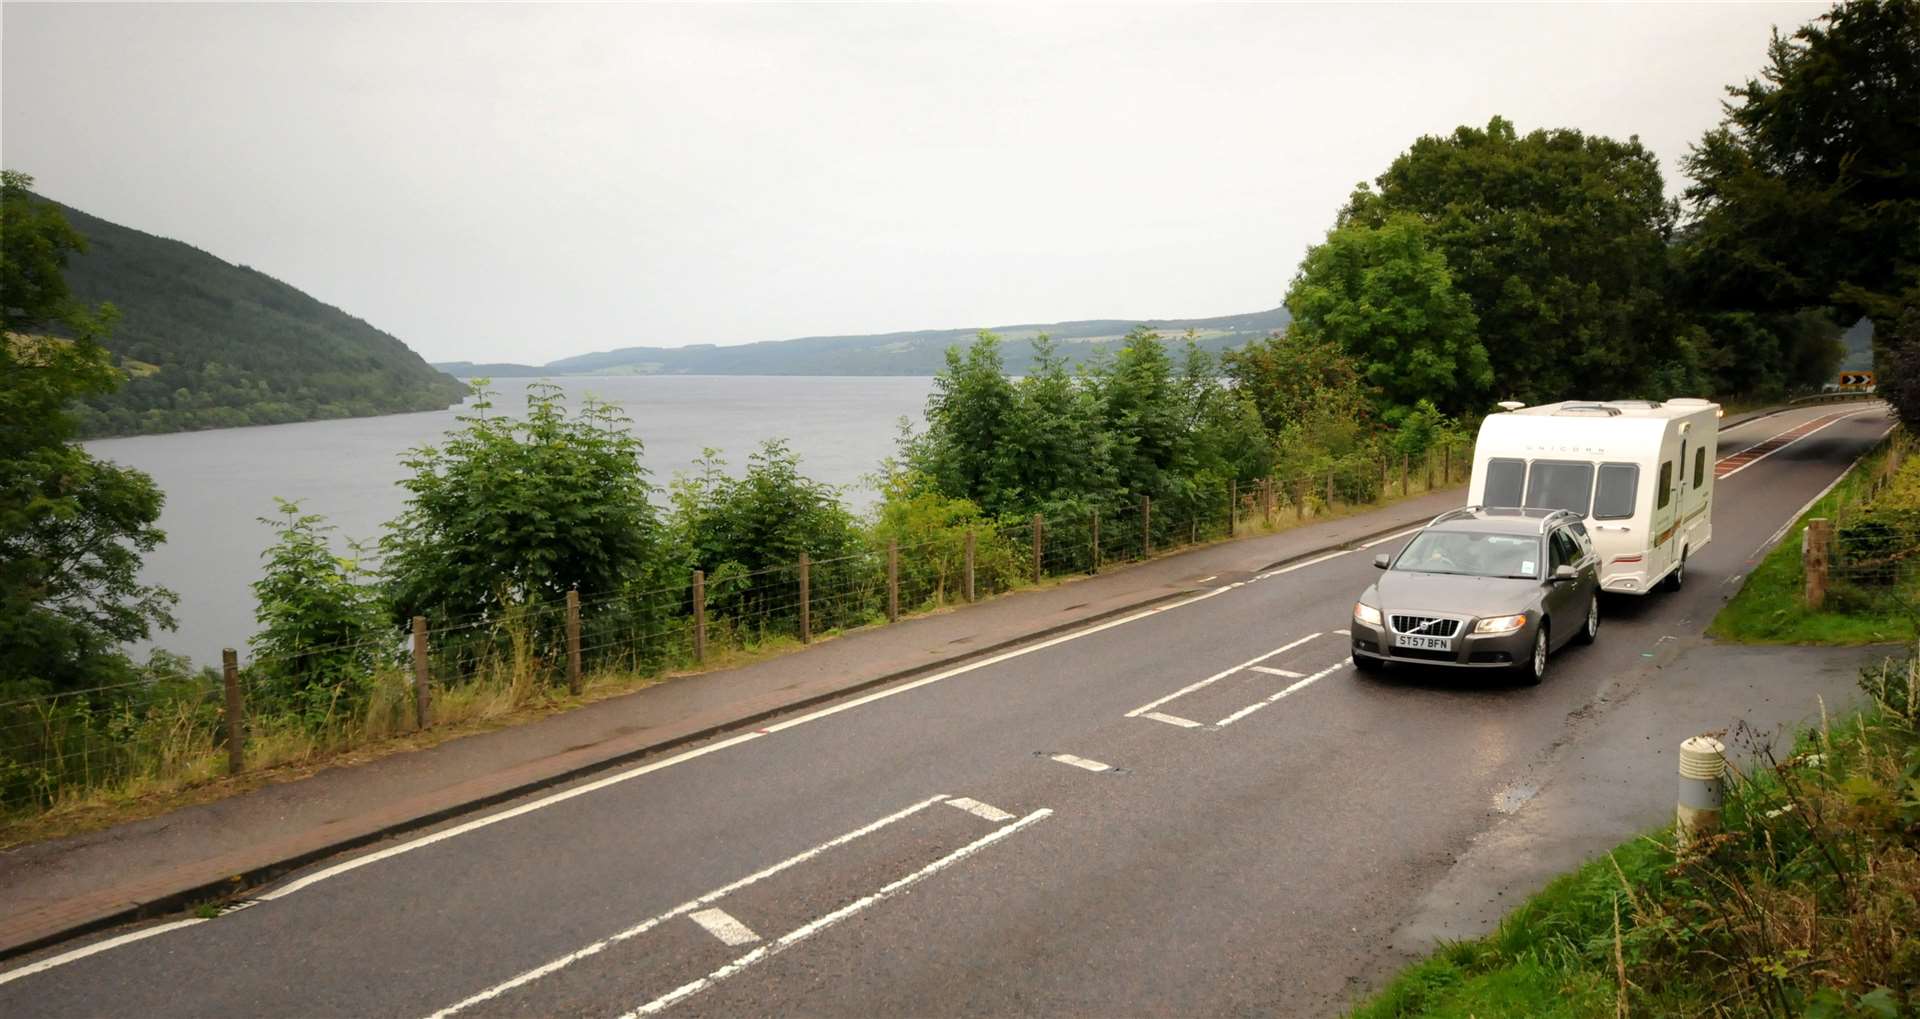 Is it time to push for improvements to the A82?